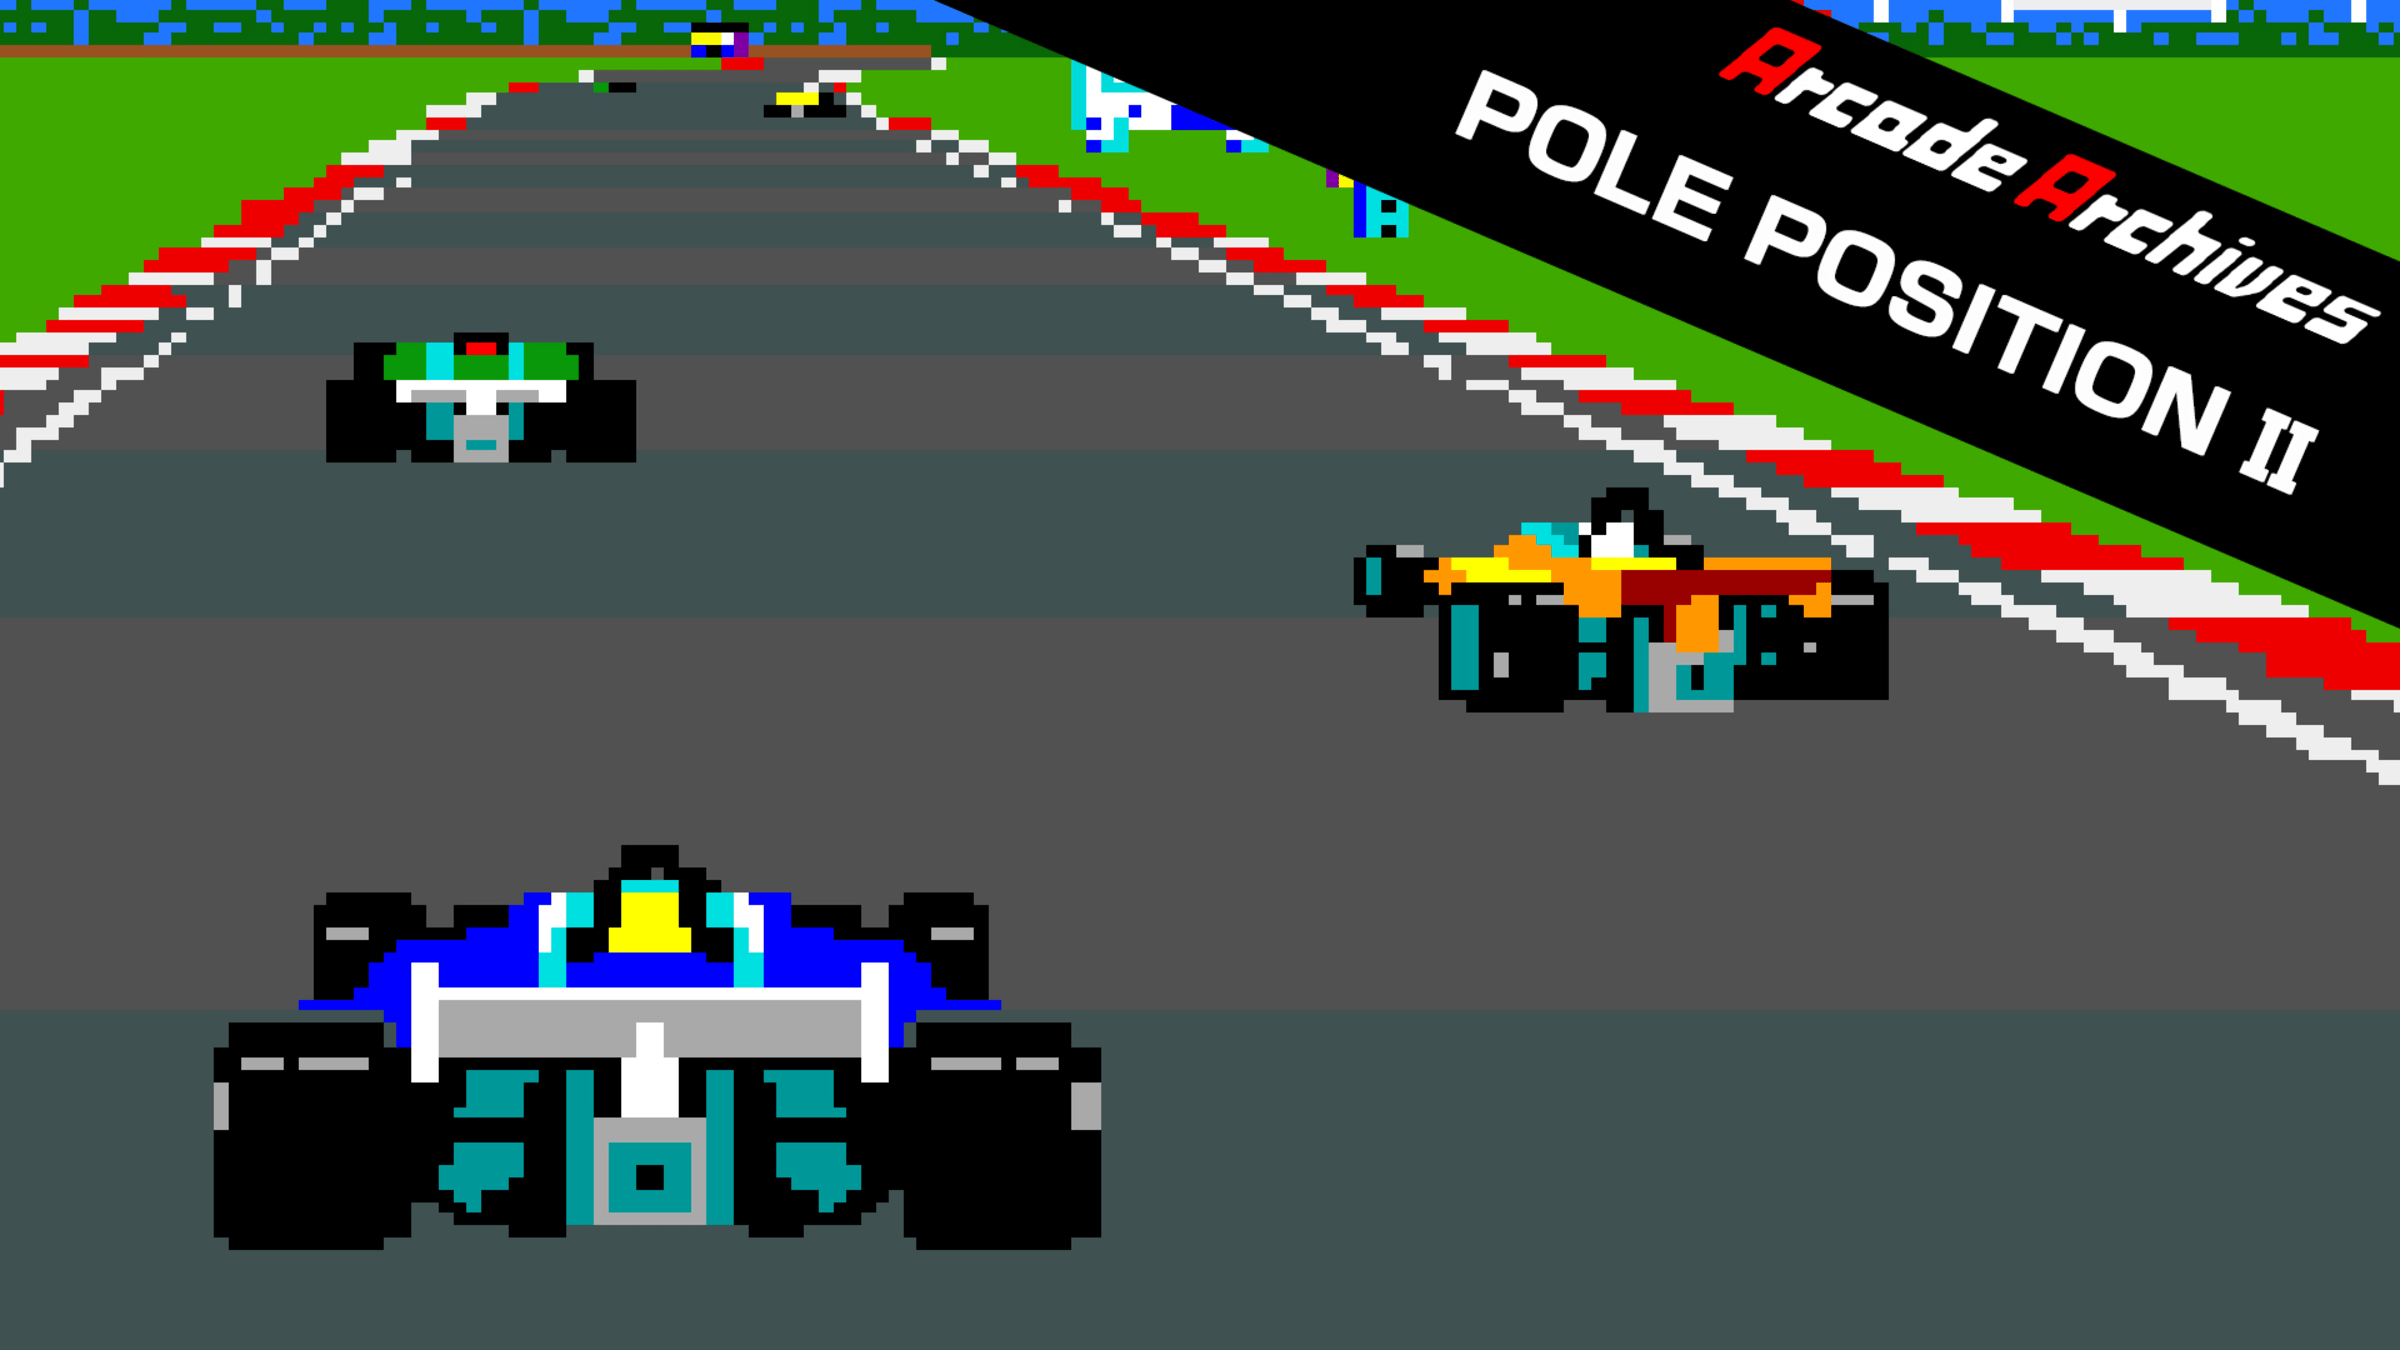 Pole Position finally comes to the Switch through Arcade Archives